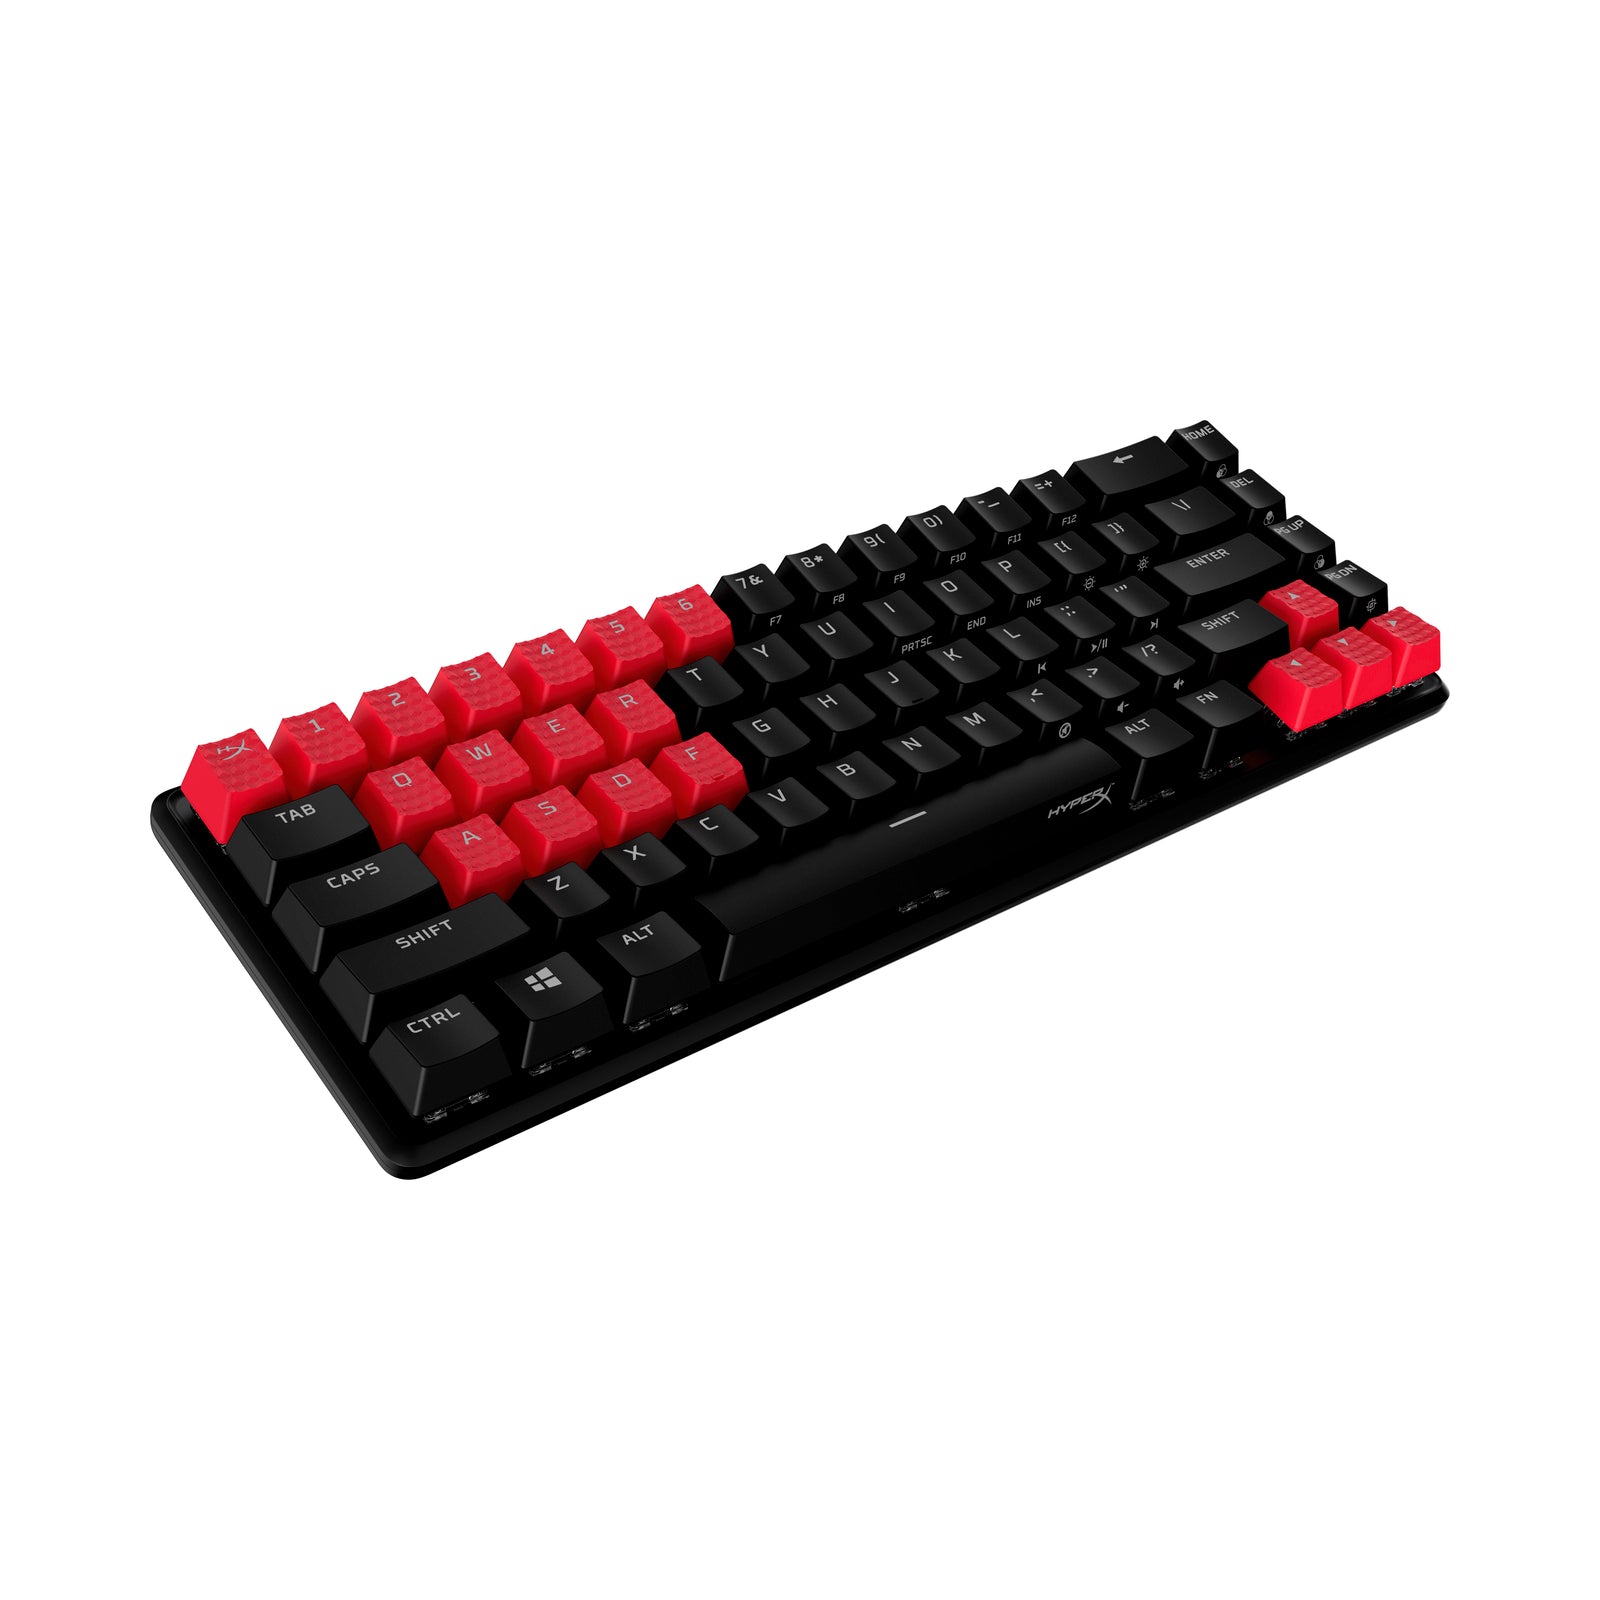 Front angled view of HyperX rubber keycaps in red on an unlit keyboard